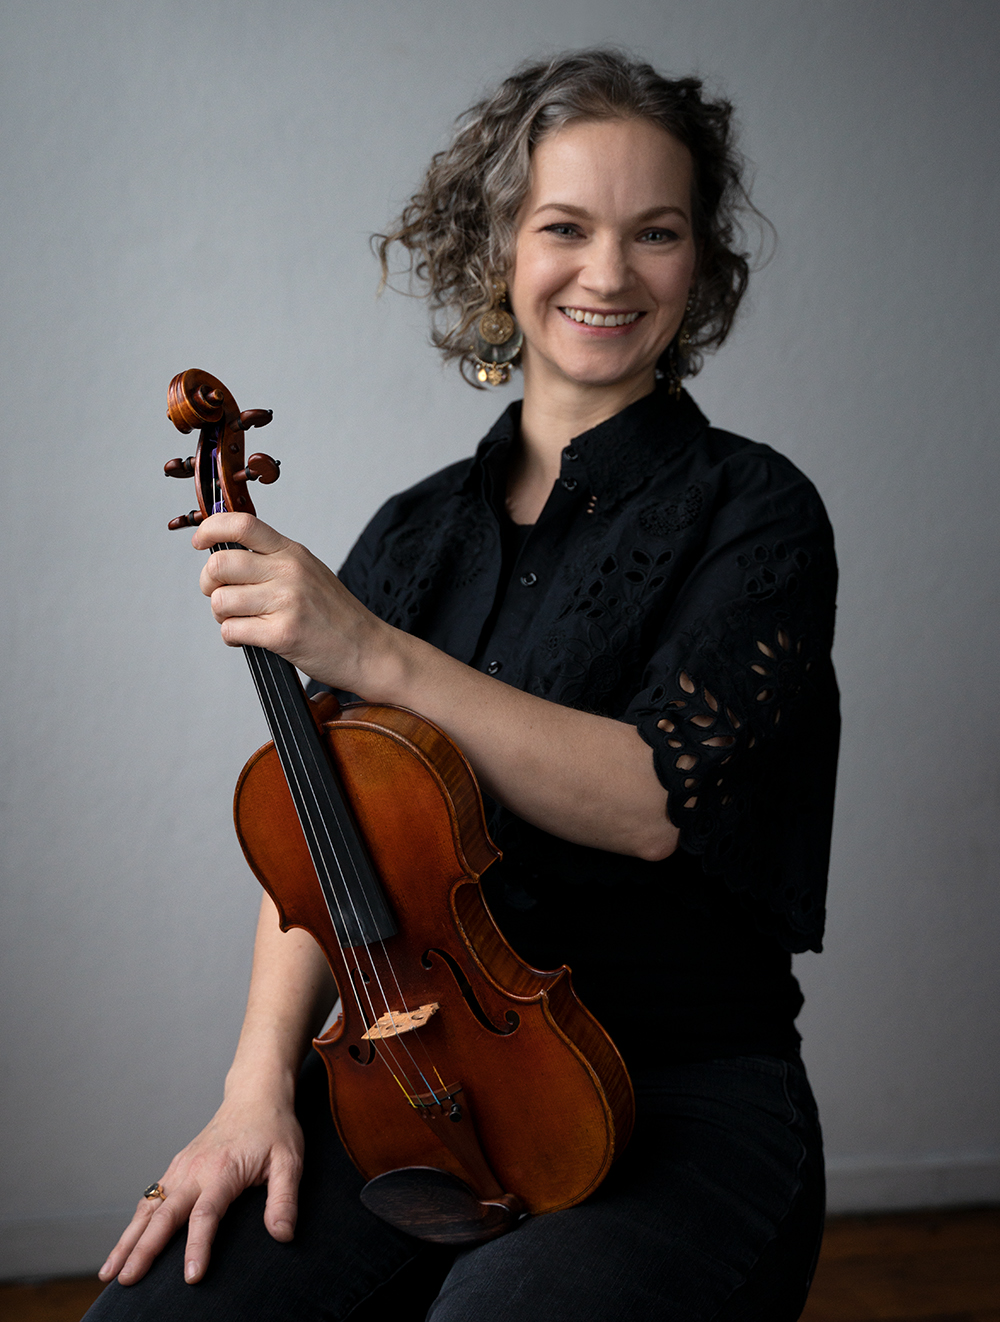 2023 Muscial America Artist of the Year - Hilary Hahn